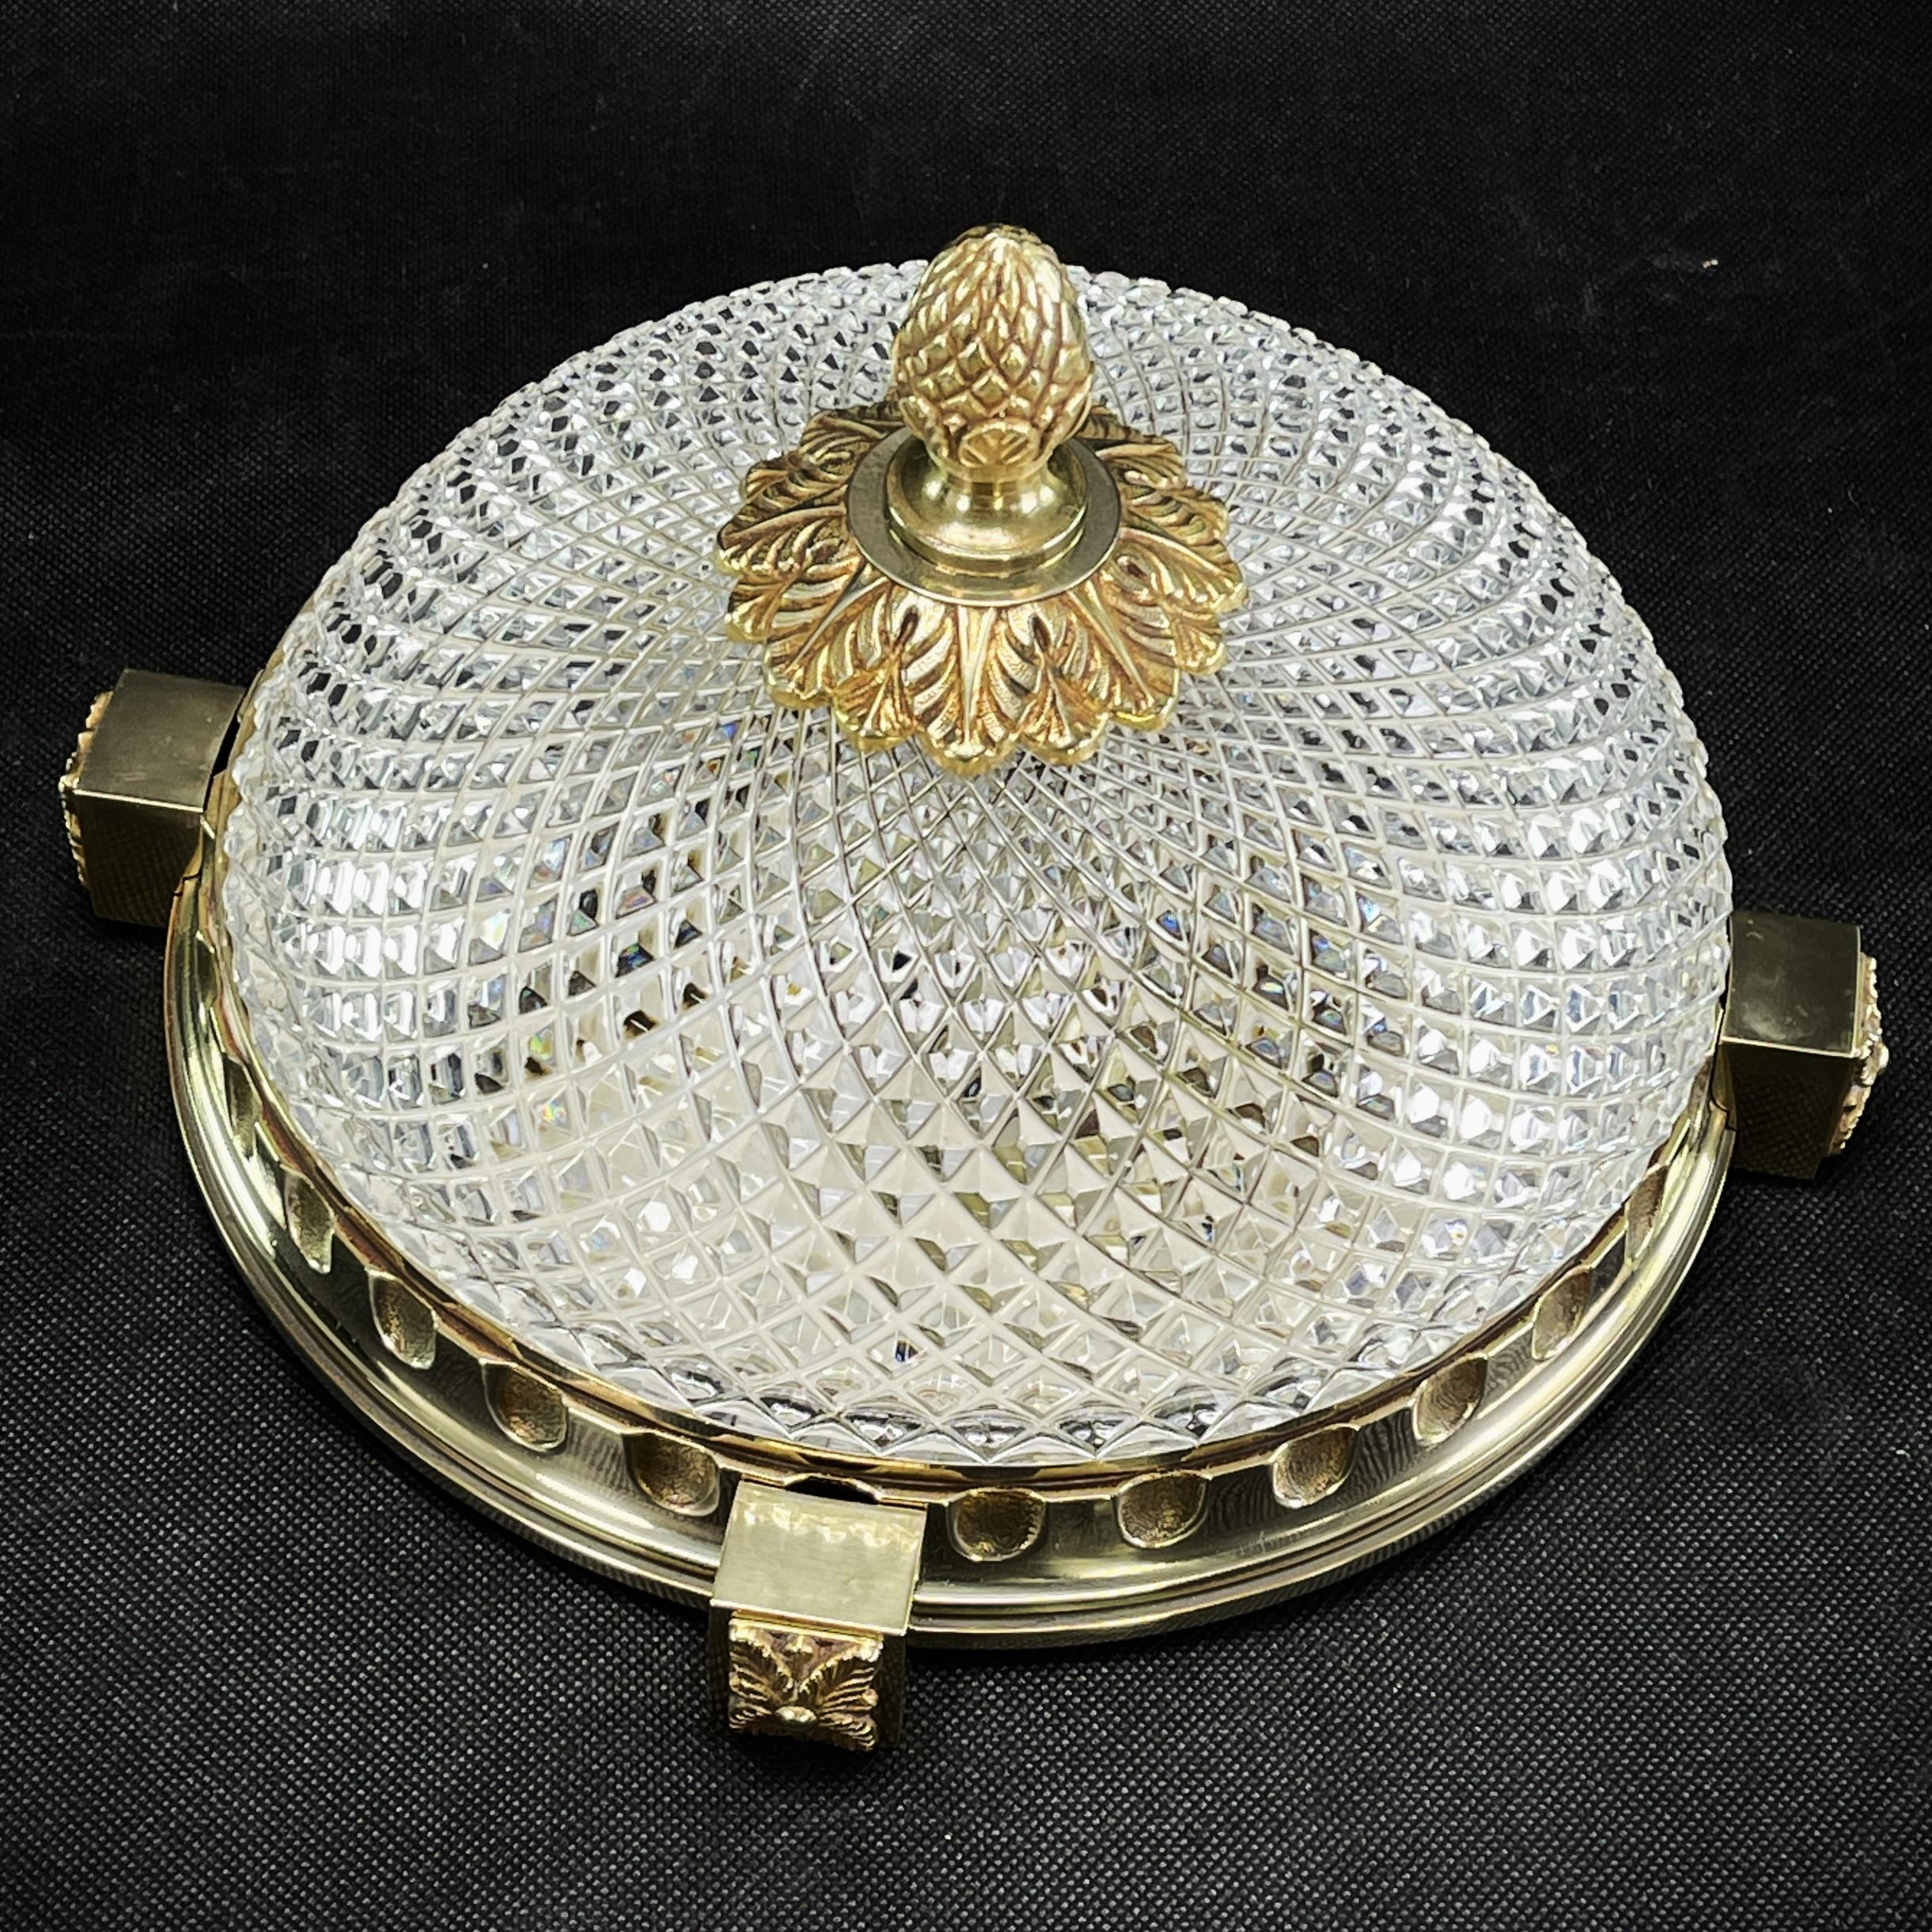 Art Deco Plafoniere - 1930s

This original art deco ceiling lamp captivates with its beautiful  Art Deco design. The lamp gives a very pleasant light. This golden ceiling lamp is an absolute design classic from the ART DECOS period.

The cleaned